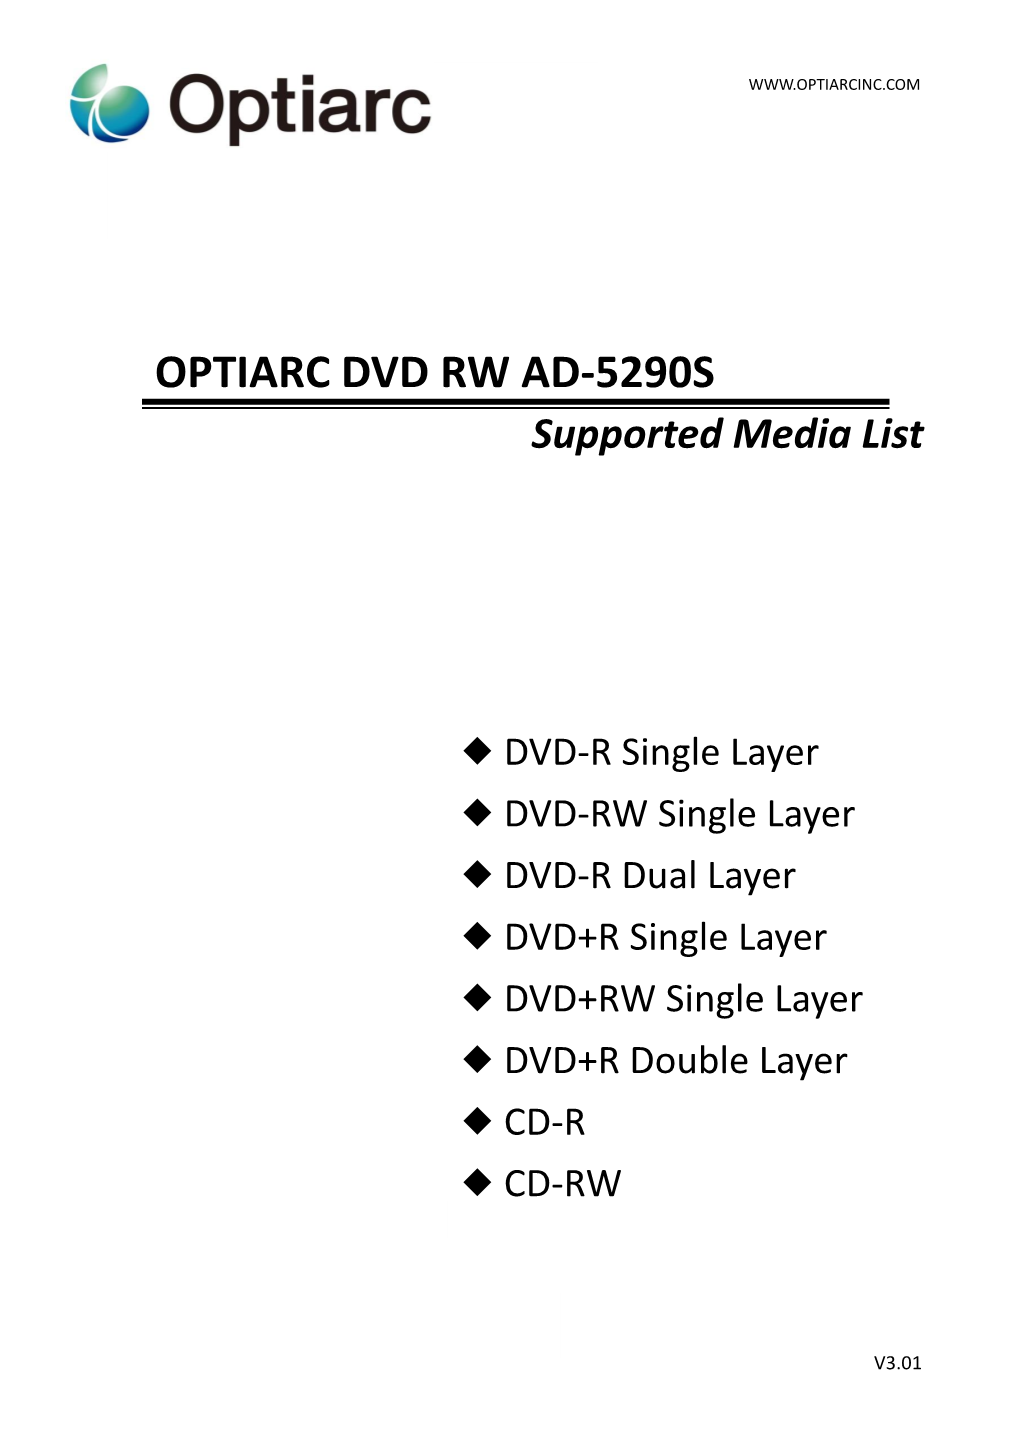 Supported Media List of OPTIARC DVD-RW AD-5290S V3.01